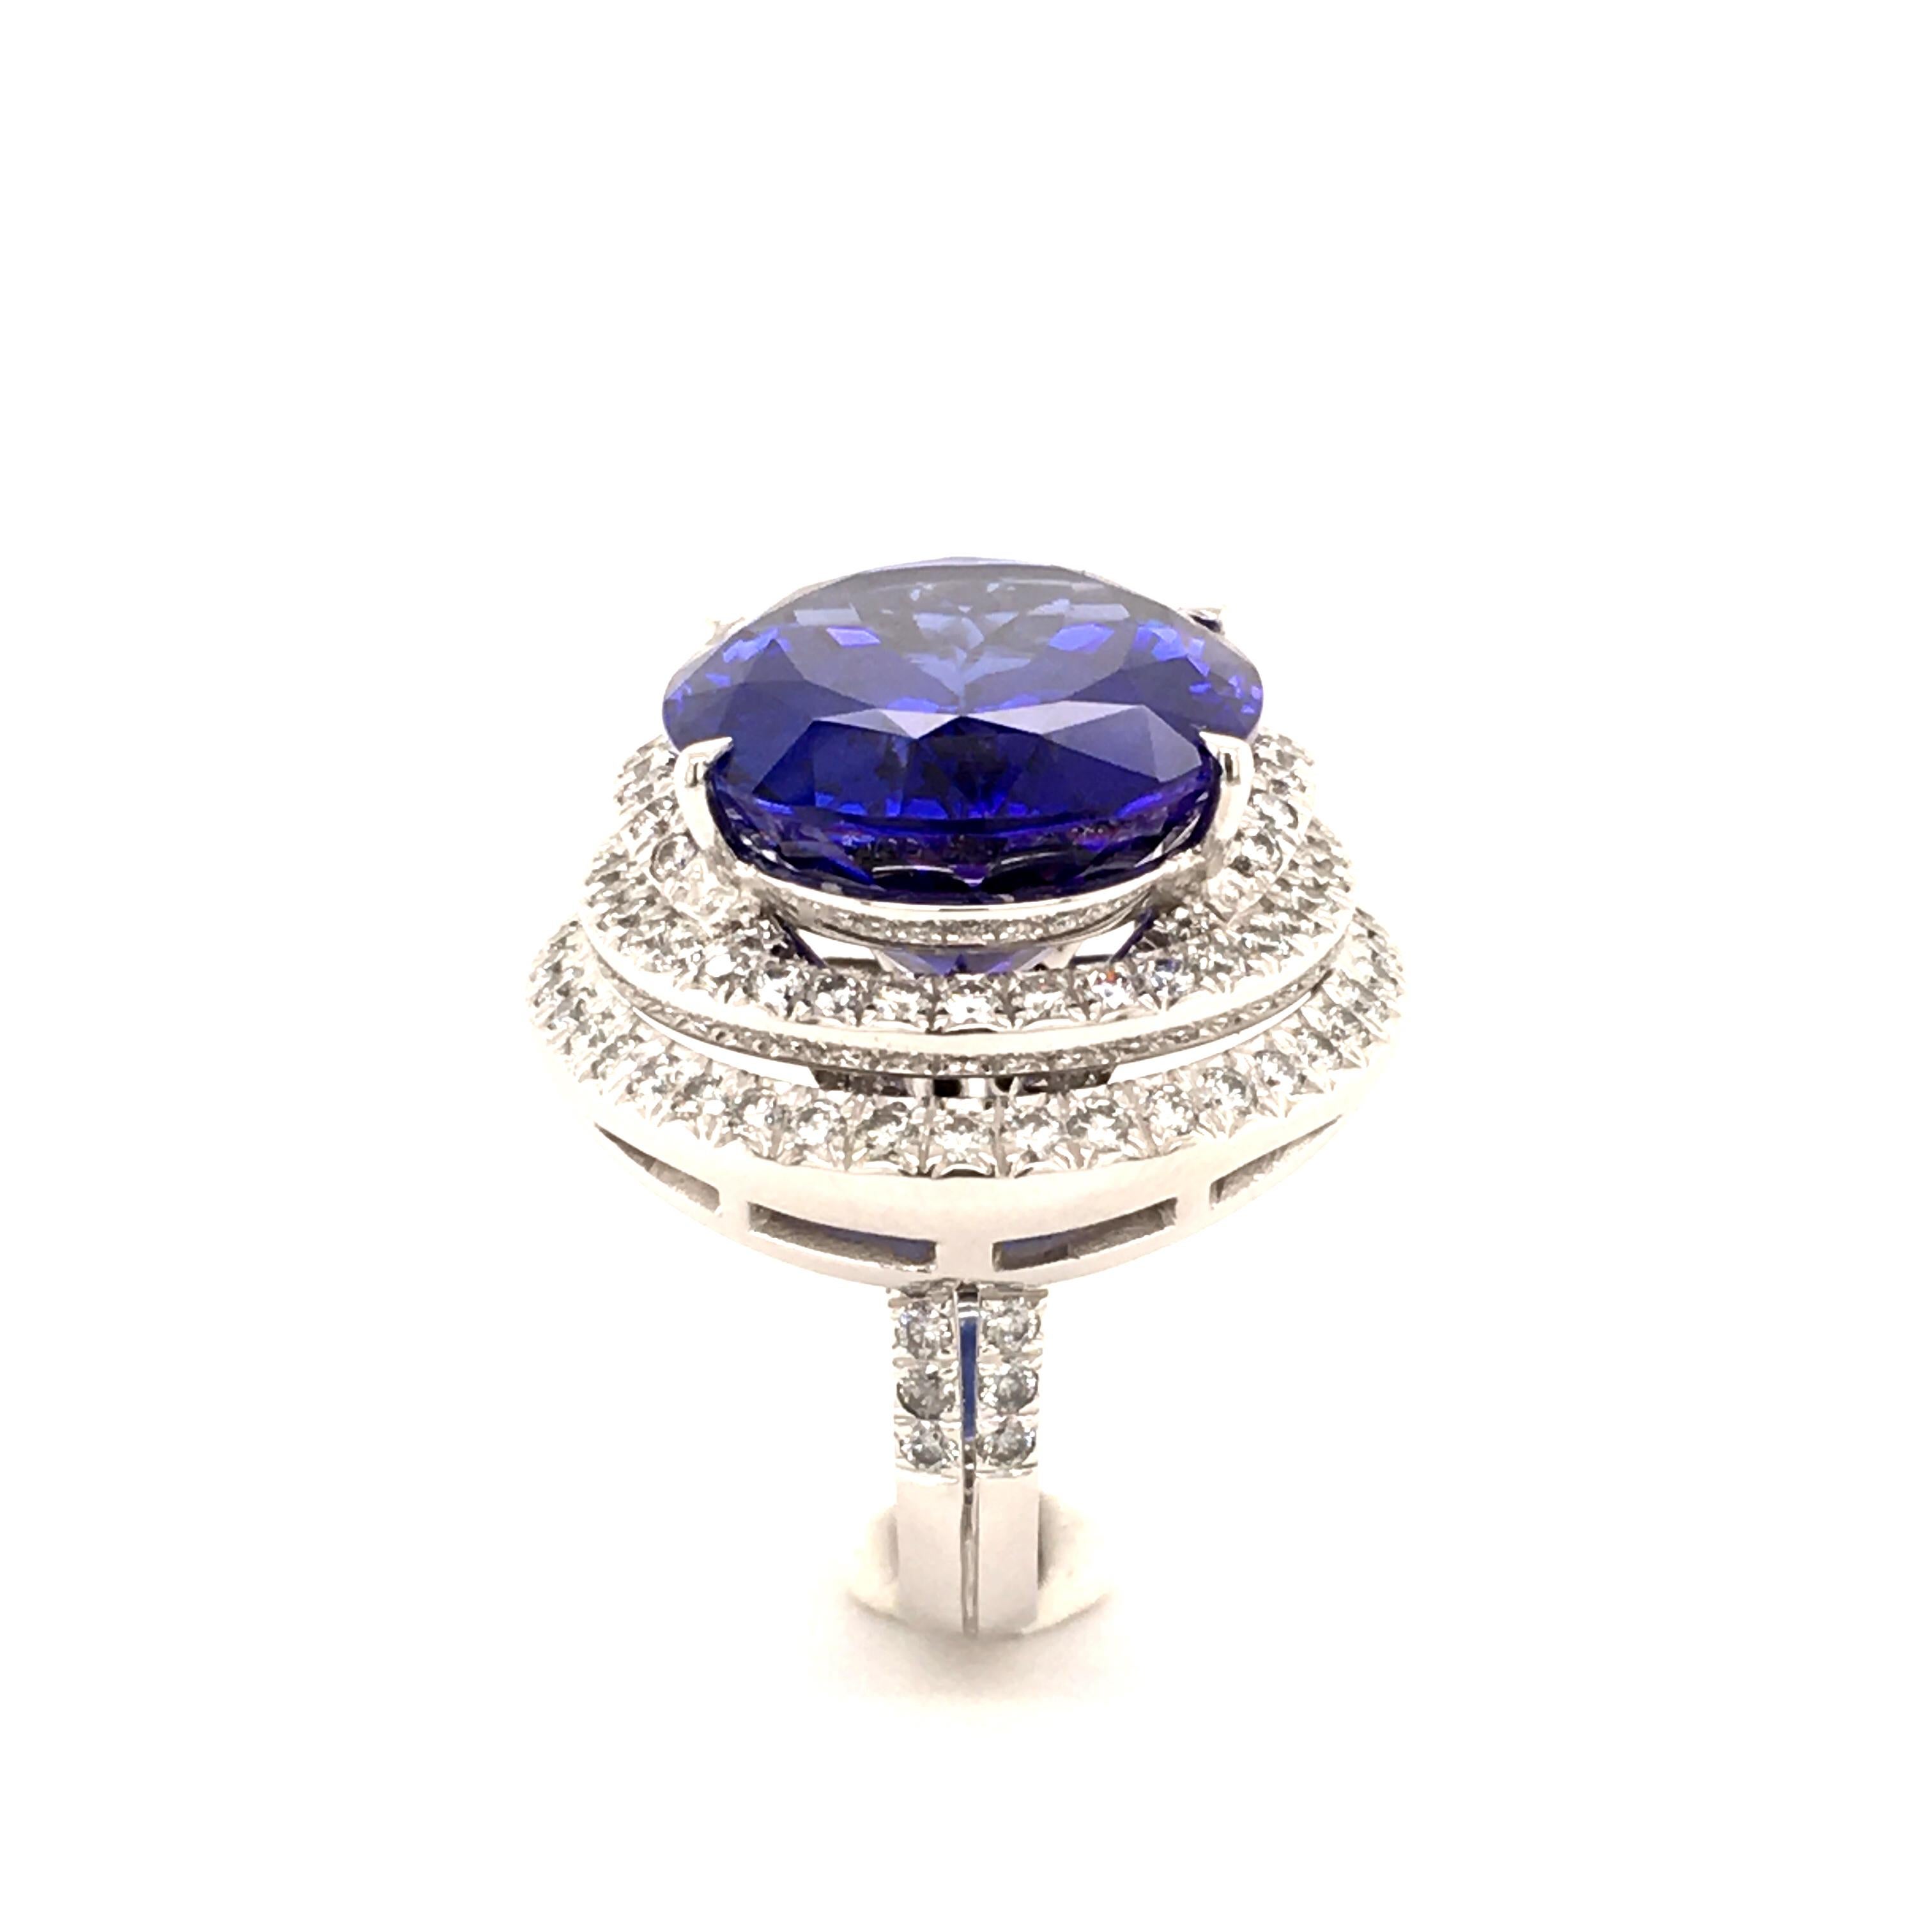 Oval Cut Spectacular 23.39 Carat Tanzanite and Diamond Ring in White Gold 18 Karat For Sale